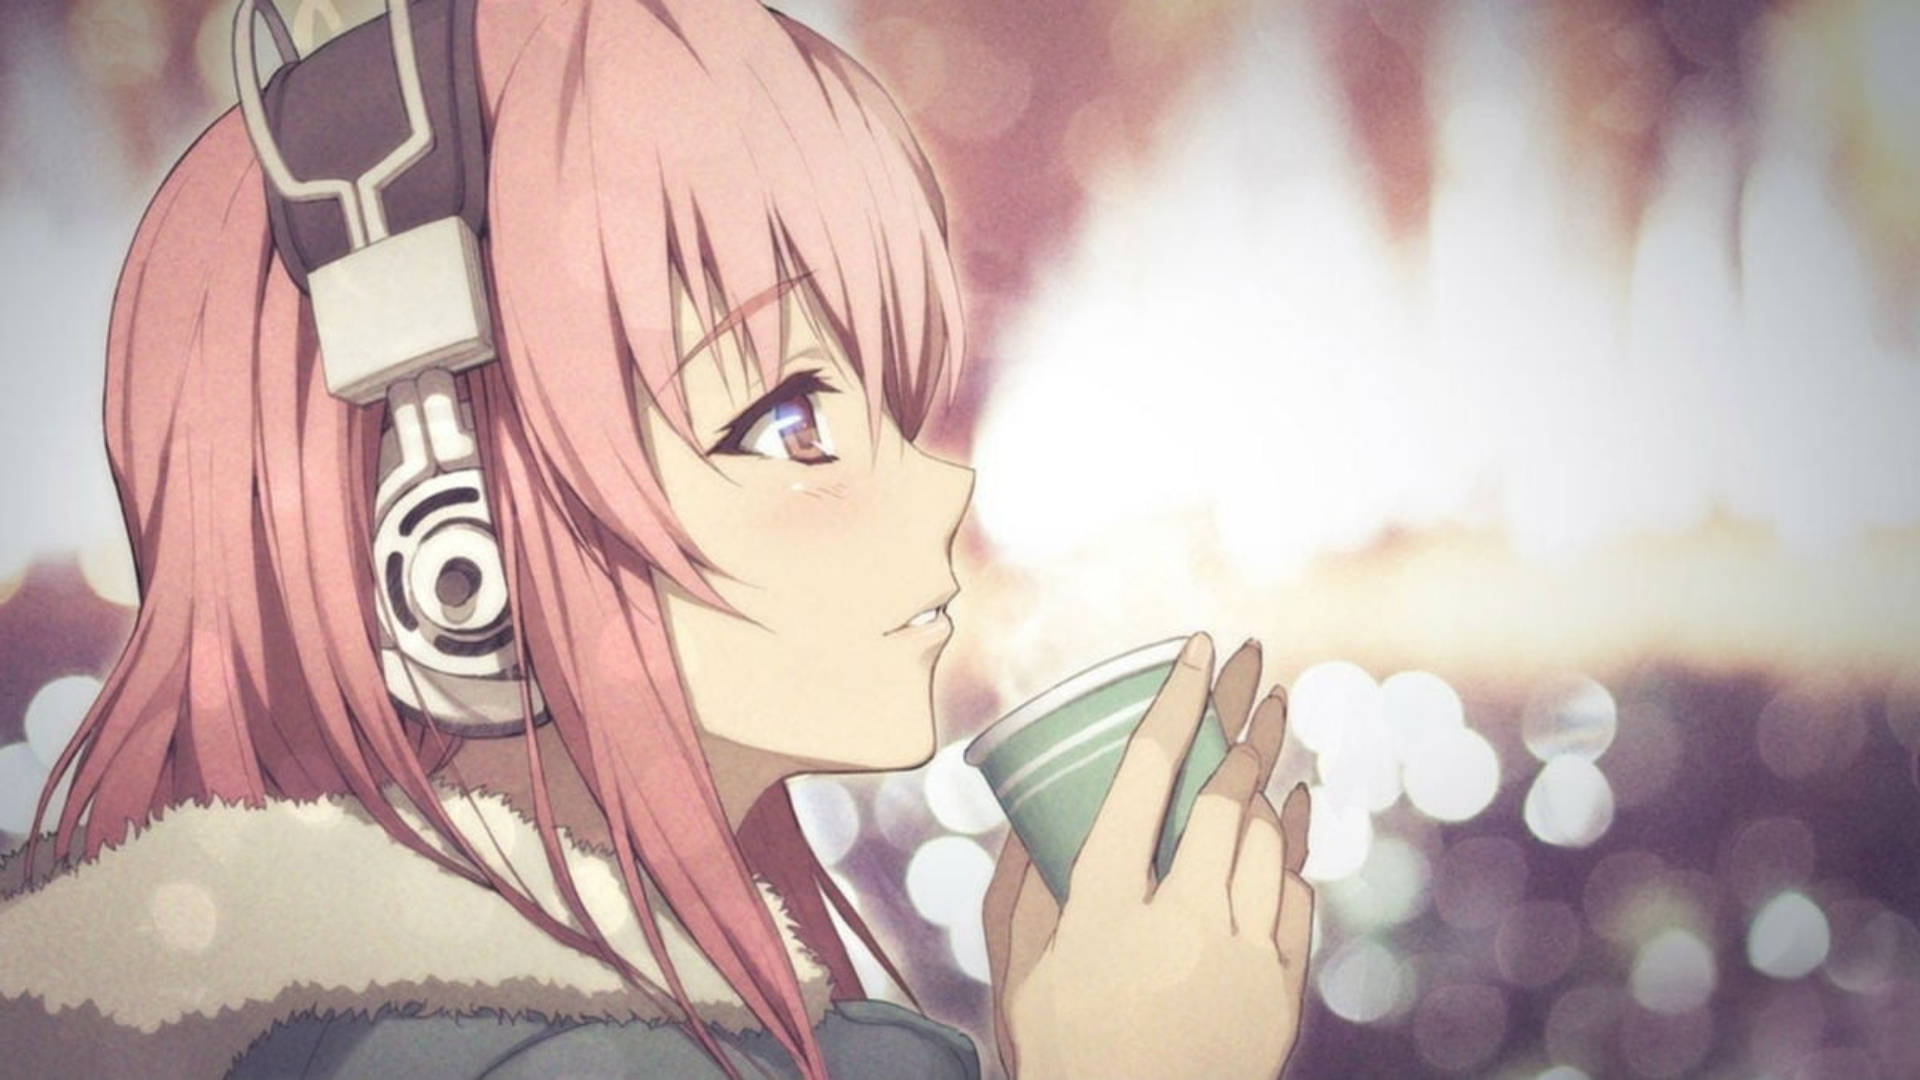 Anime Cute Girl With Pink Hair Wallpaper